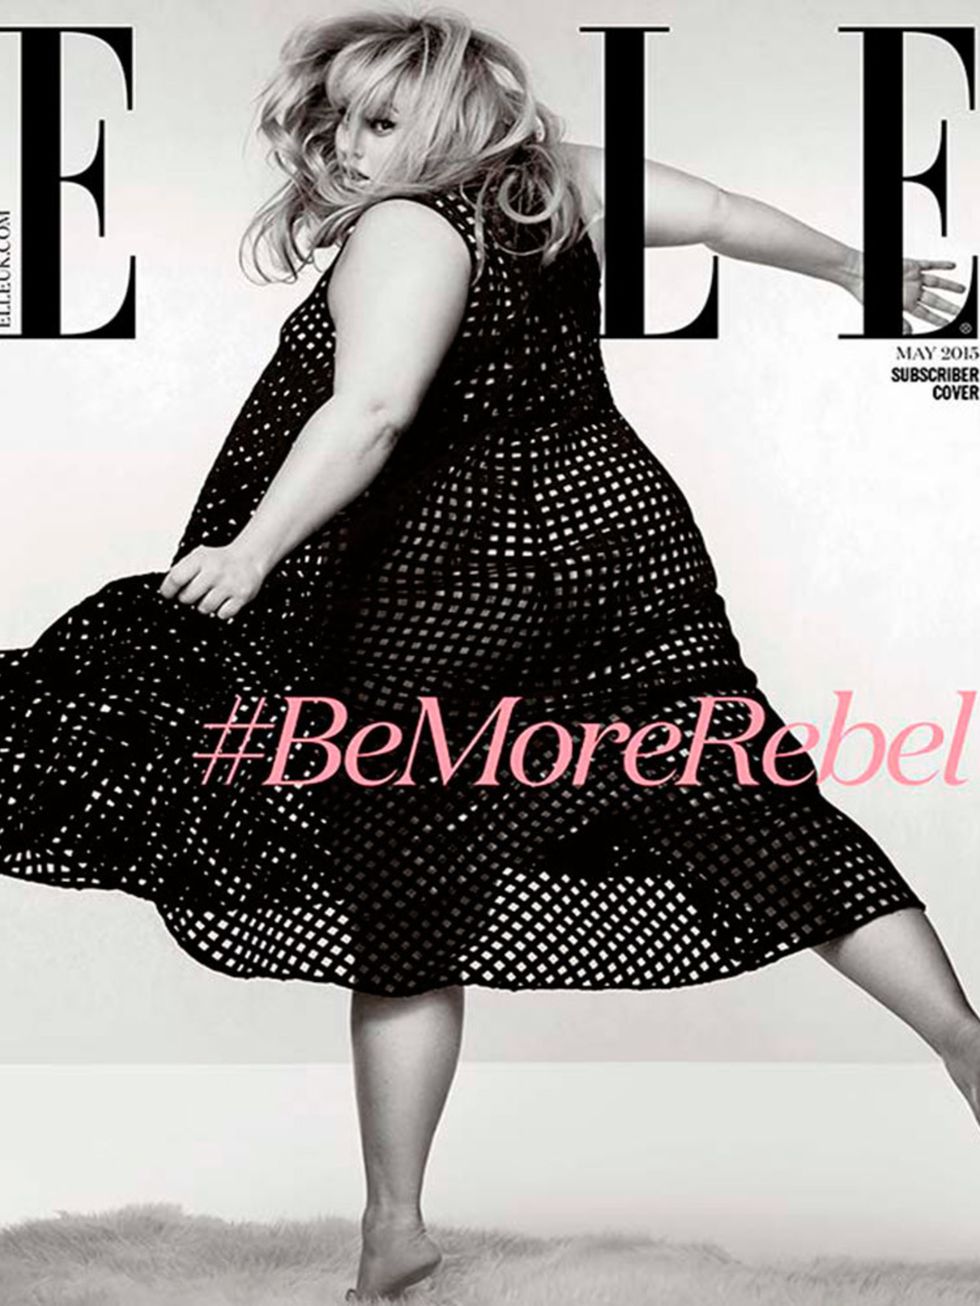 <p><a href="http://www.elleuk.com/now-trending/rebel-wilson-covers-elle-uk-may-2015-issue" target="_blank">Rebel Wilson</a> wearing ASOS Curve on ELLE subscriber cover.</p>